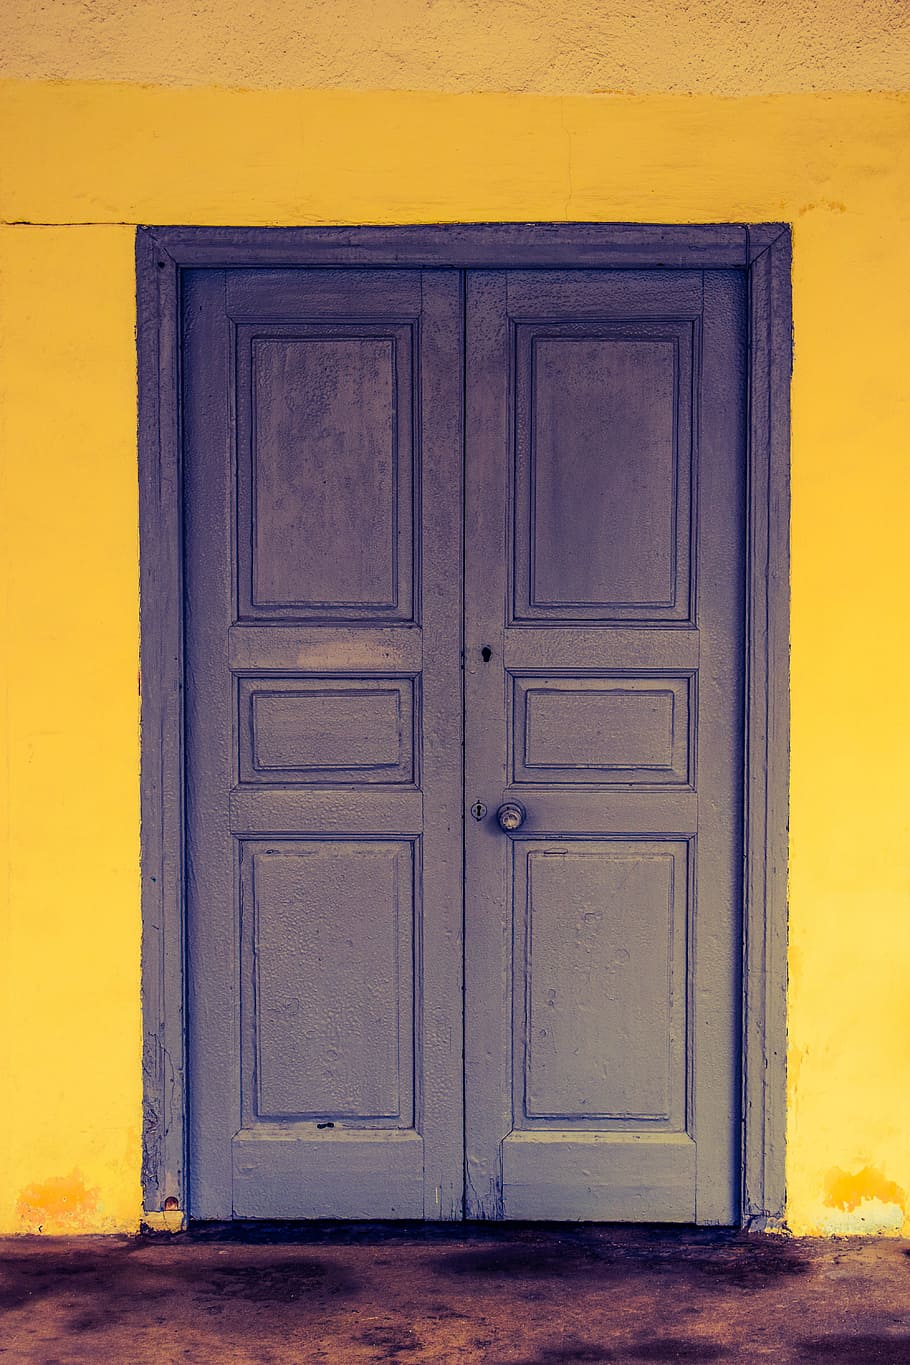 Cyprus, Paralimni, Old House, Door, Aged, wooden, traditional